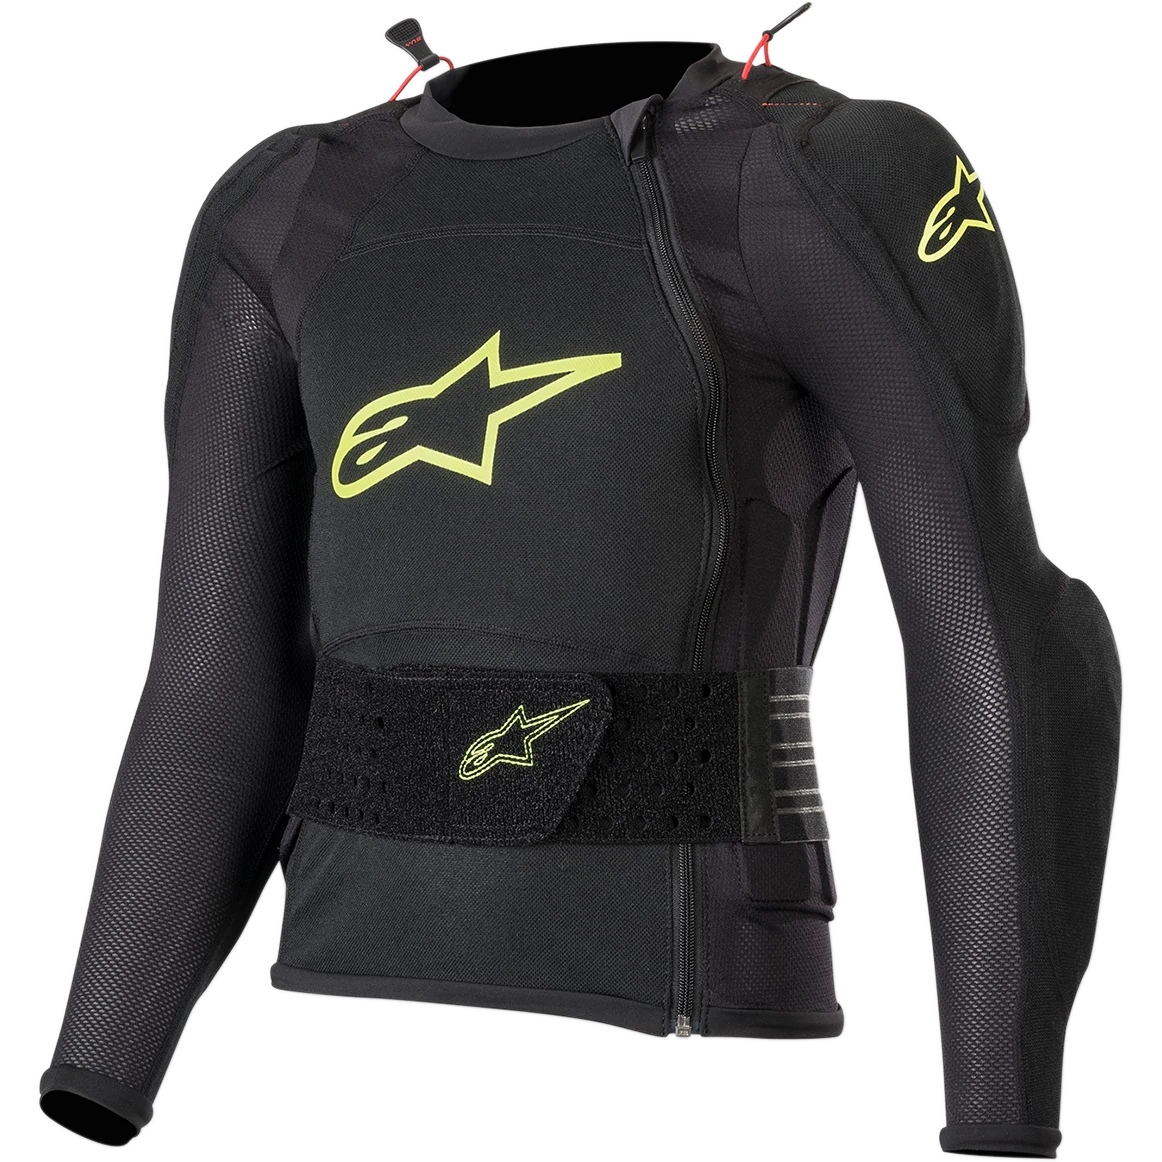 Picture of Alpinestars Bionic Plus Youth Protection Jacket Kids - black/yellow fluo